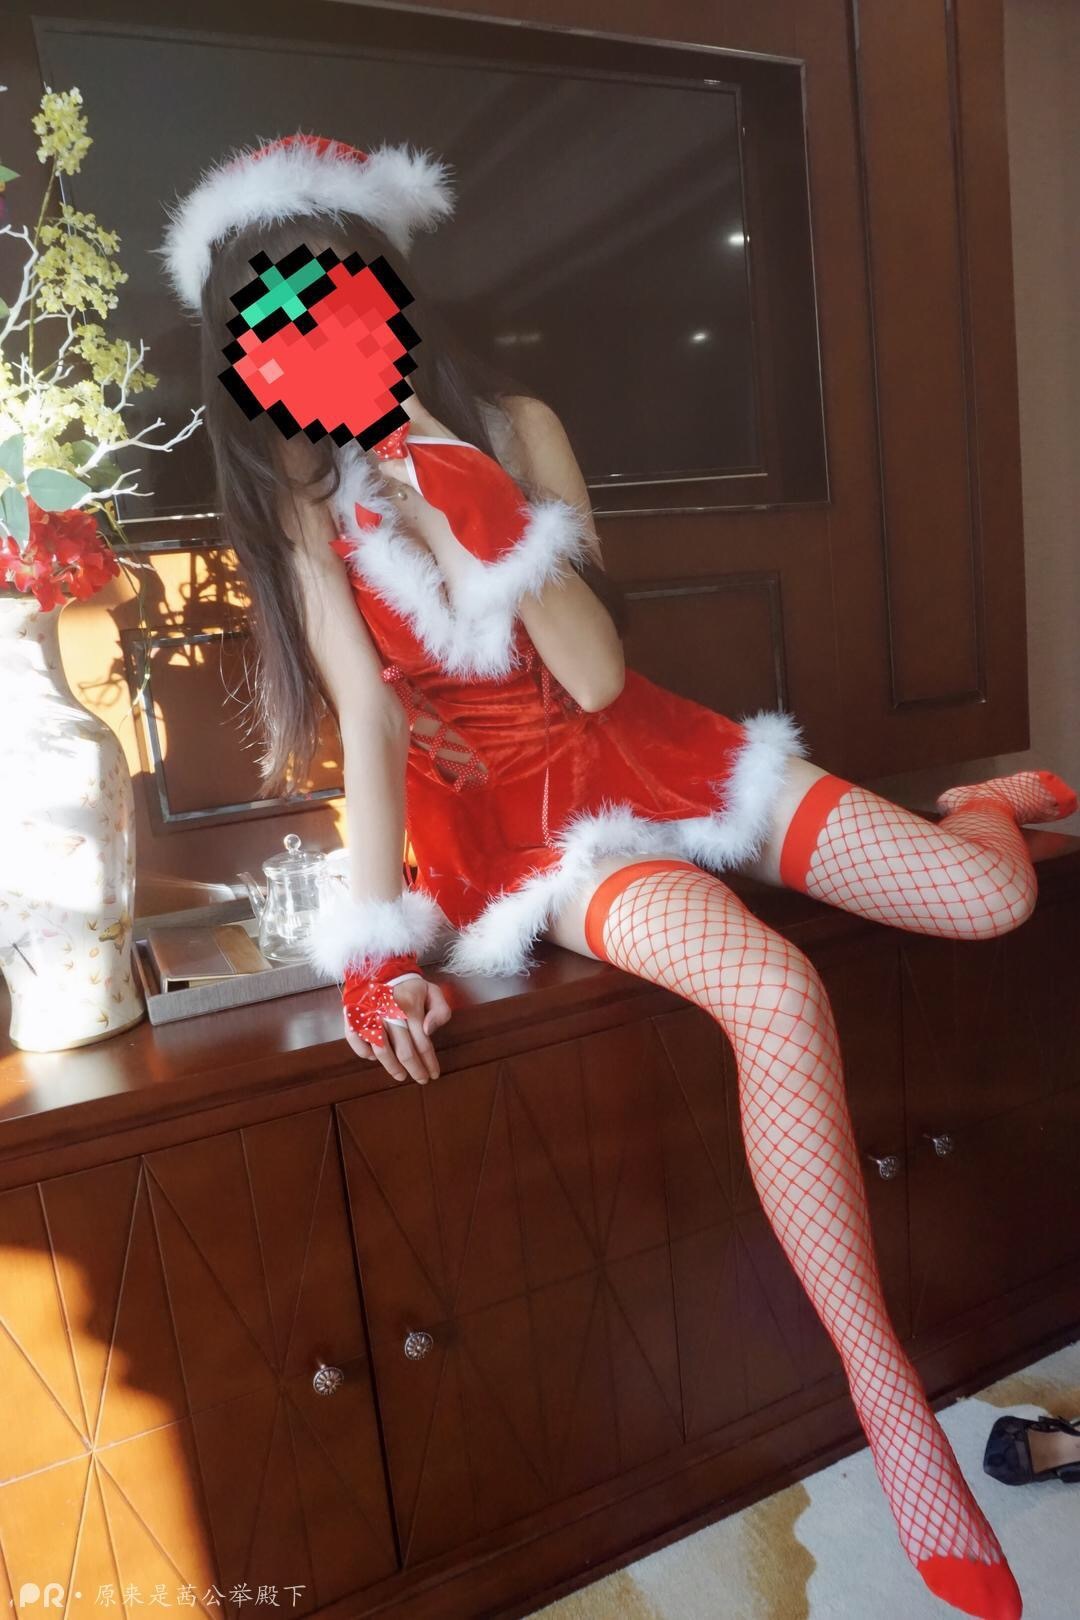 It's your majesty Princess sissy - 171224, the maid of Christmas